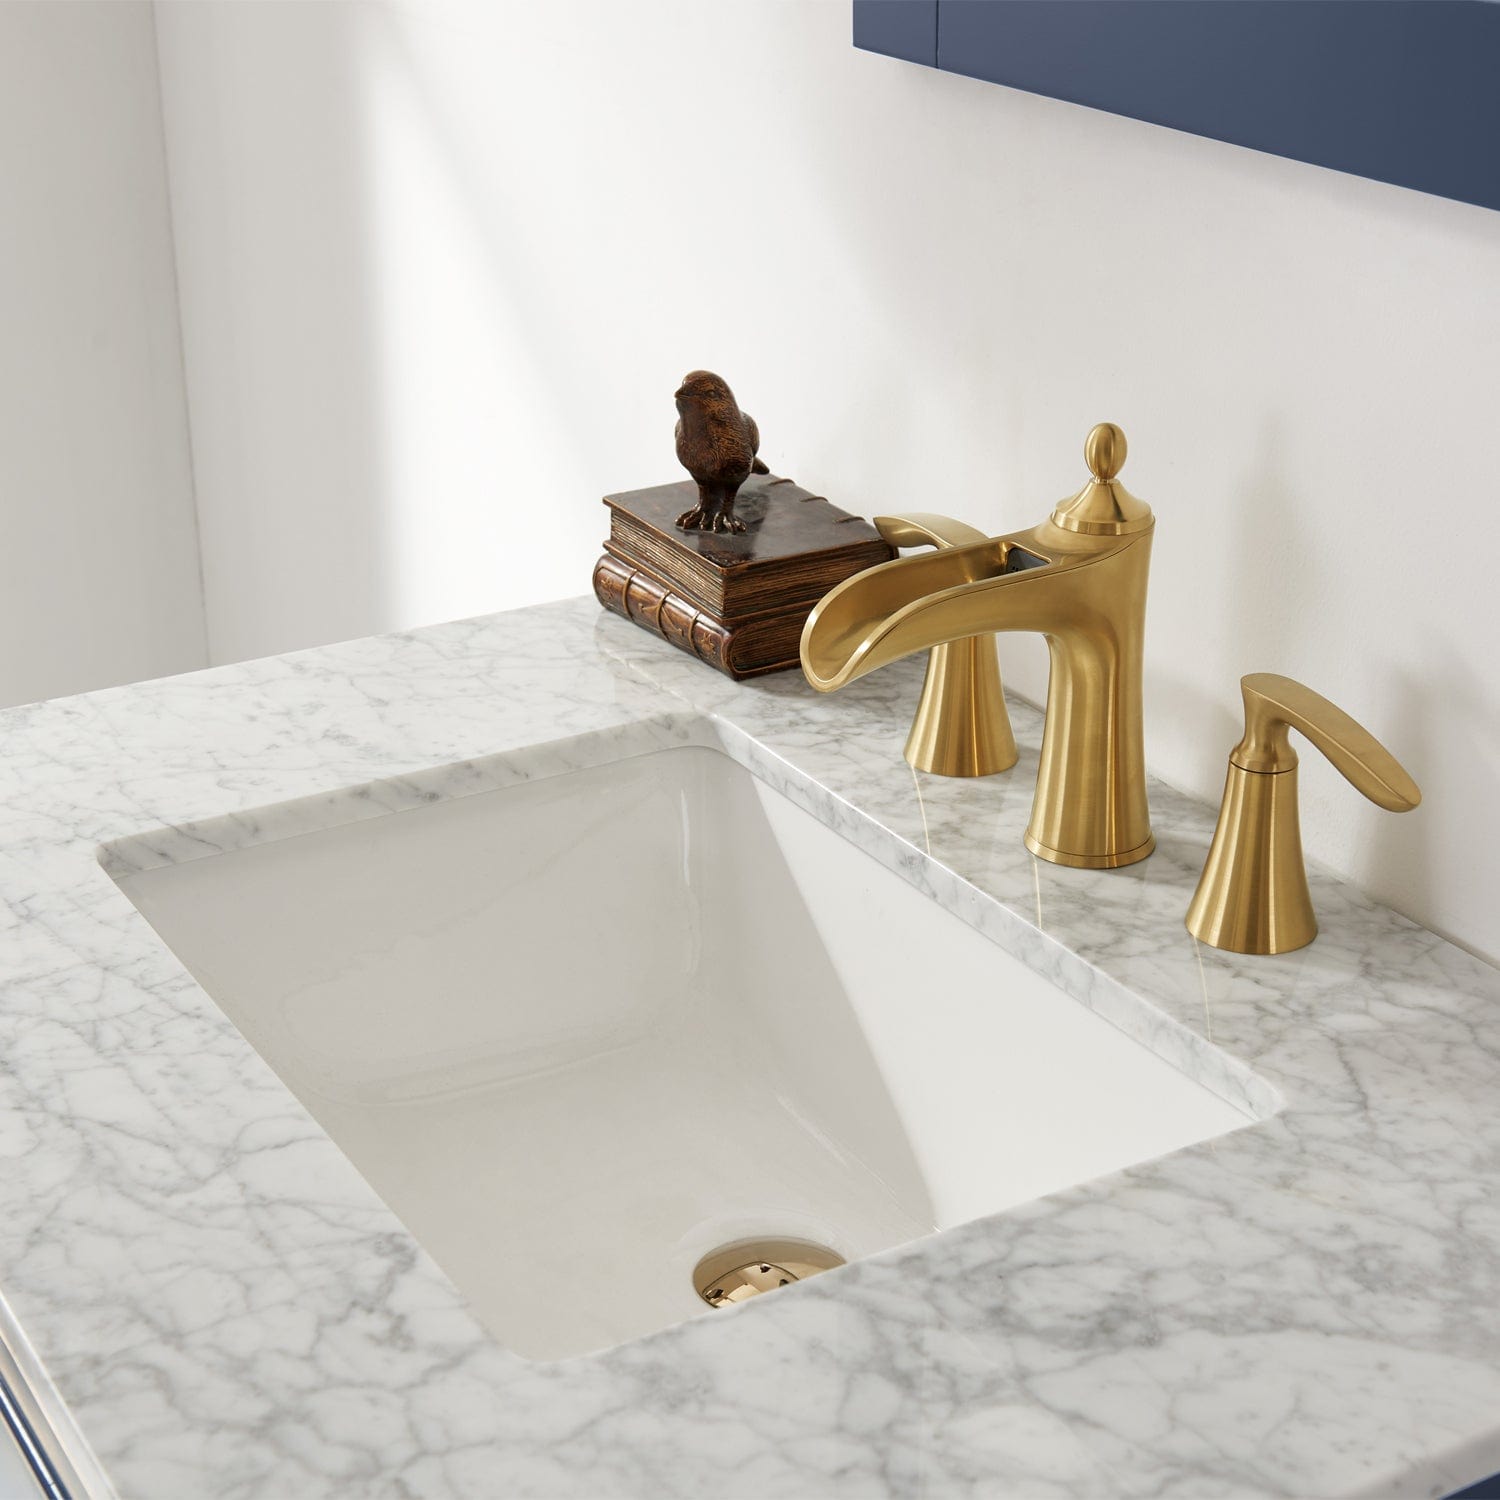 Altair Ivy 30" Single Bathroom Vanity Set in Royal Blue and Carrara White Marble Countertop with Mirror 531030-RB-CA - Molaix631112971058Vanity531030-RB-CA